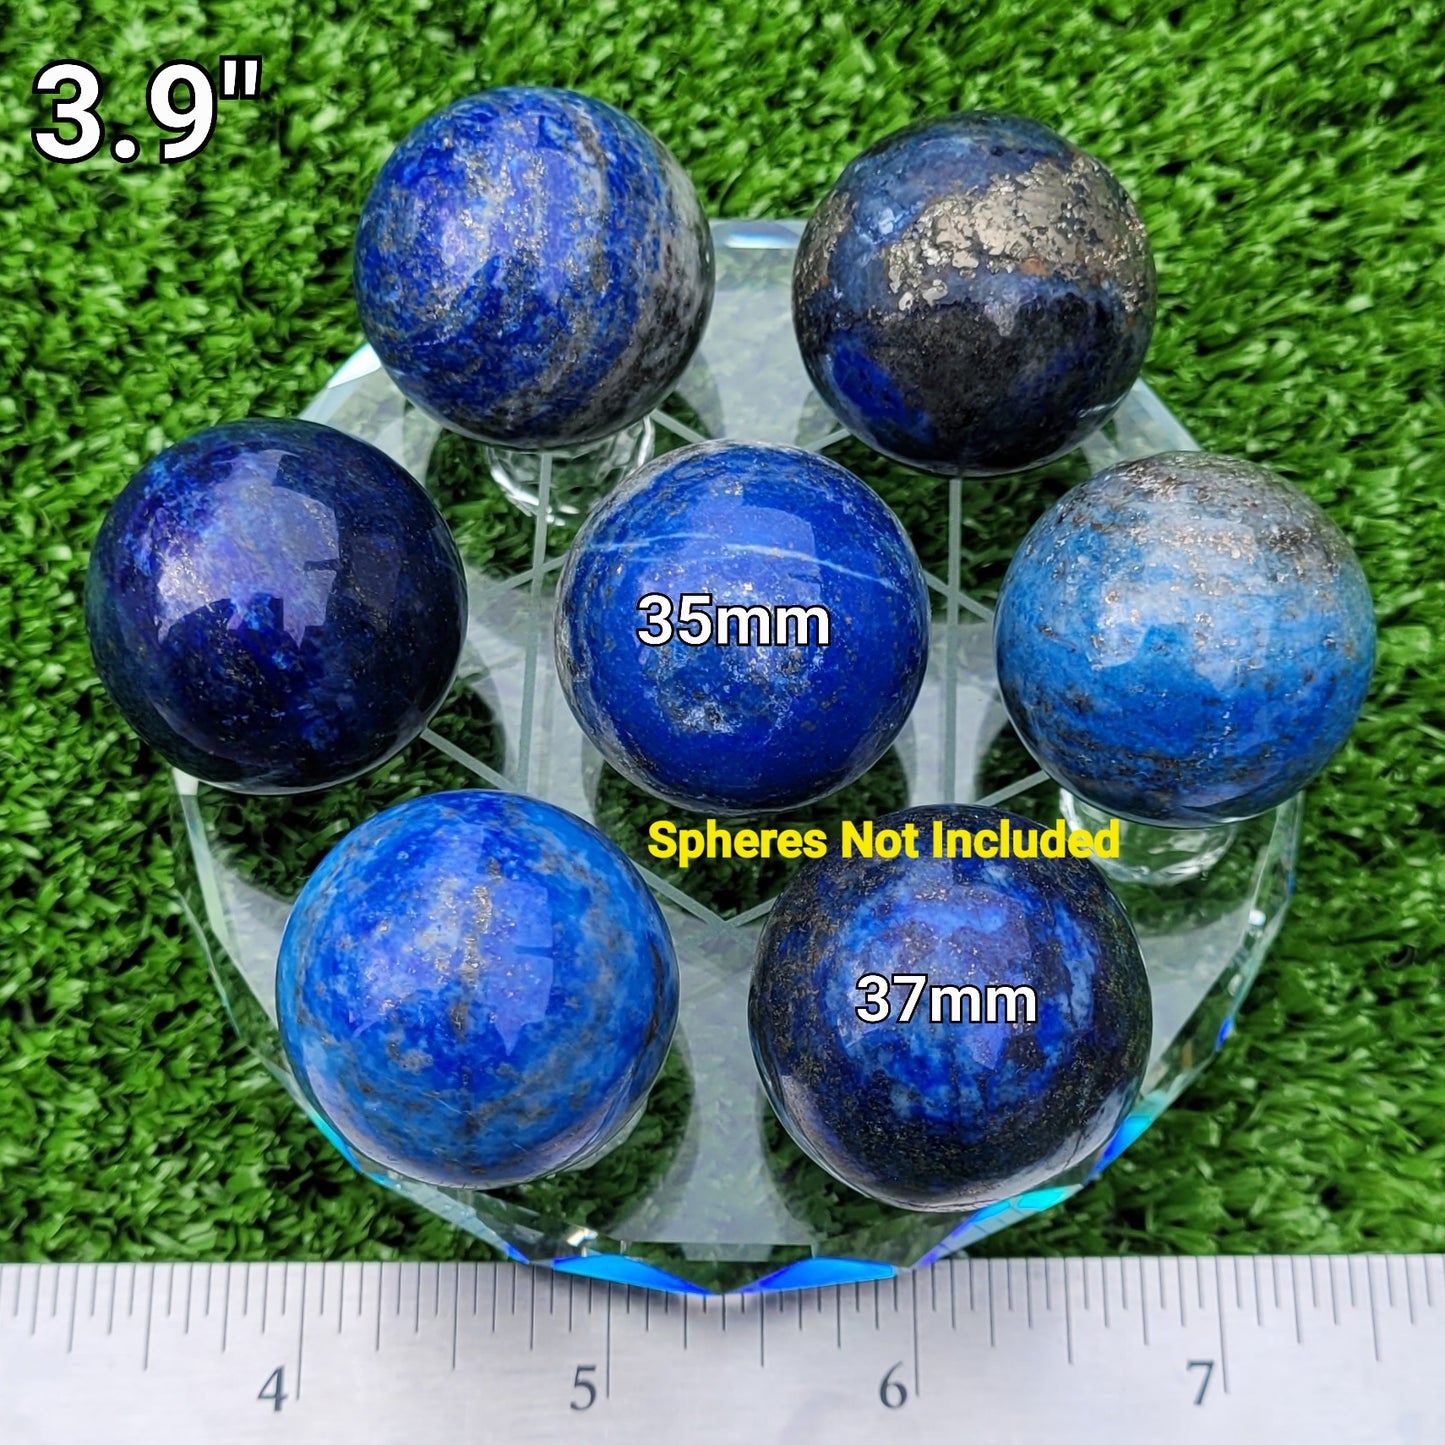 Solid Etched Beveled Glass Sphere Display Plate Stand for 7 Crystal Balls or Eggs 1" to 3" (25mm to 77mm)